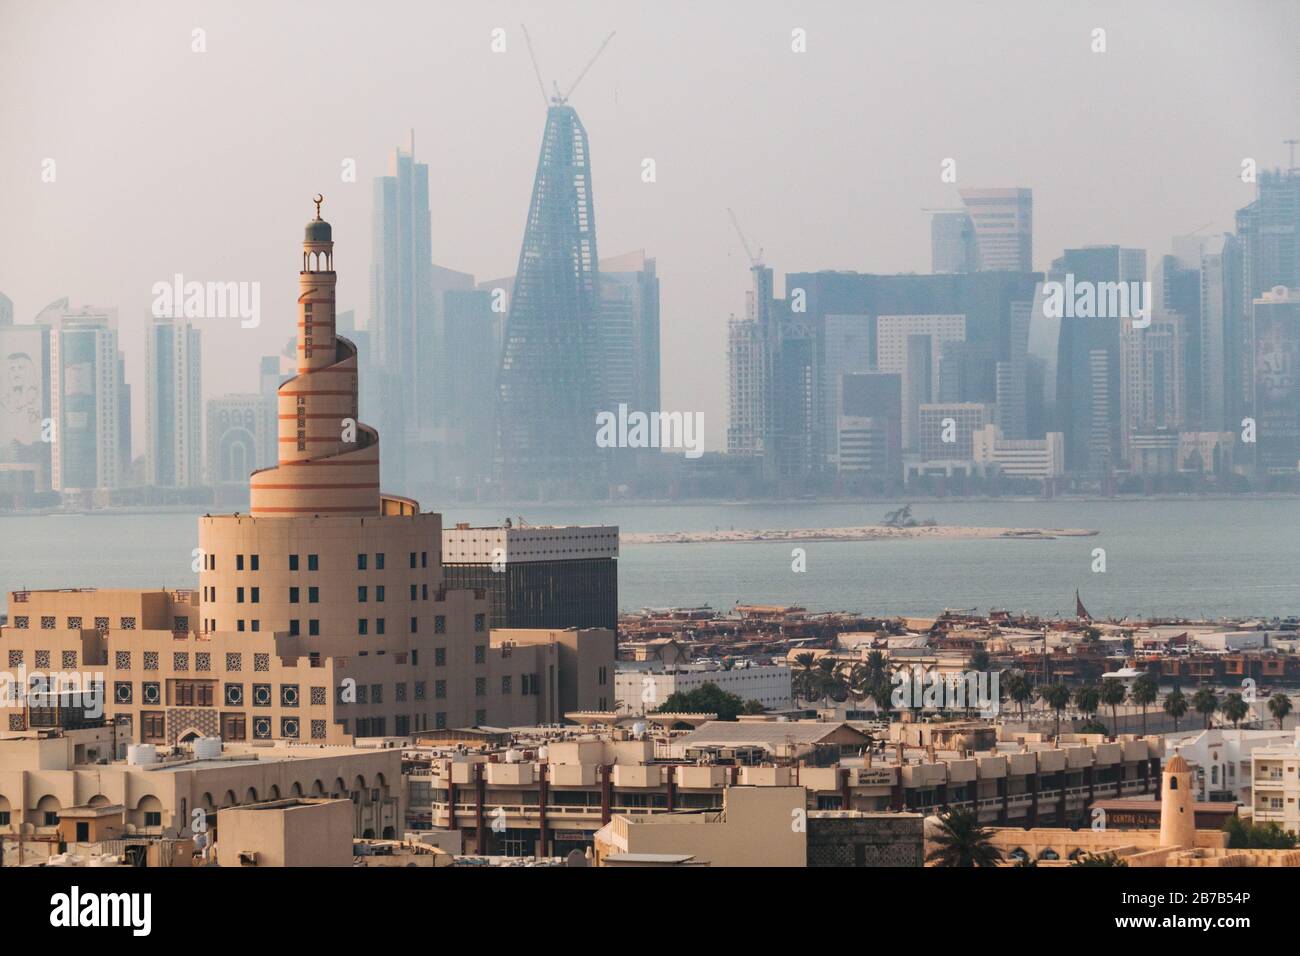 The famous Spiral Mosque in Doha, Qatar - a replica of the Great Mosque of Al-Mutawwakil in Samarra in Iraq. The city skyline can be seen behind Stock Photo